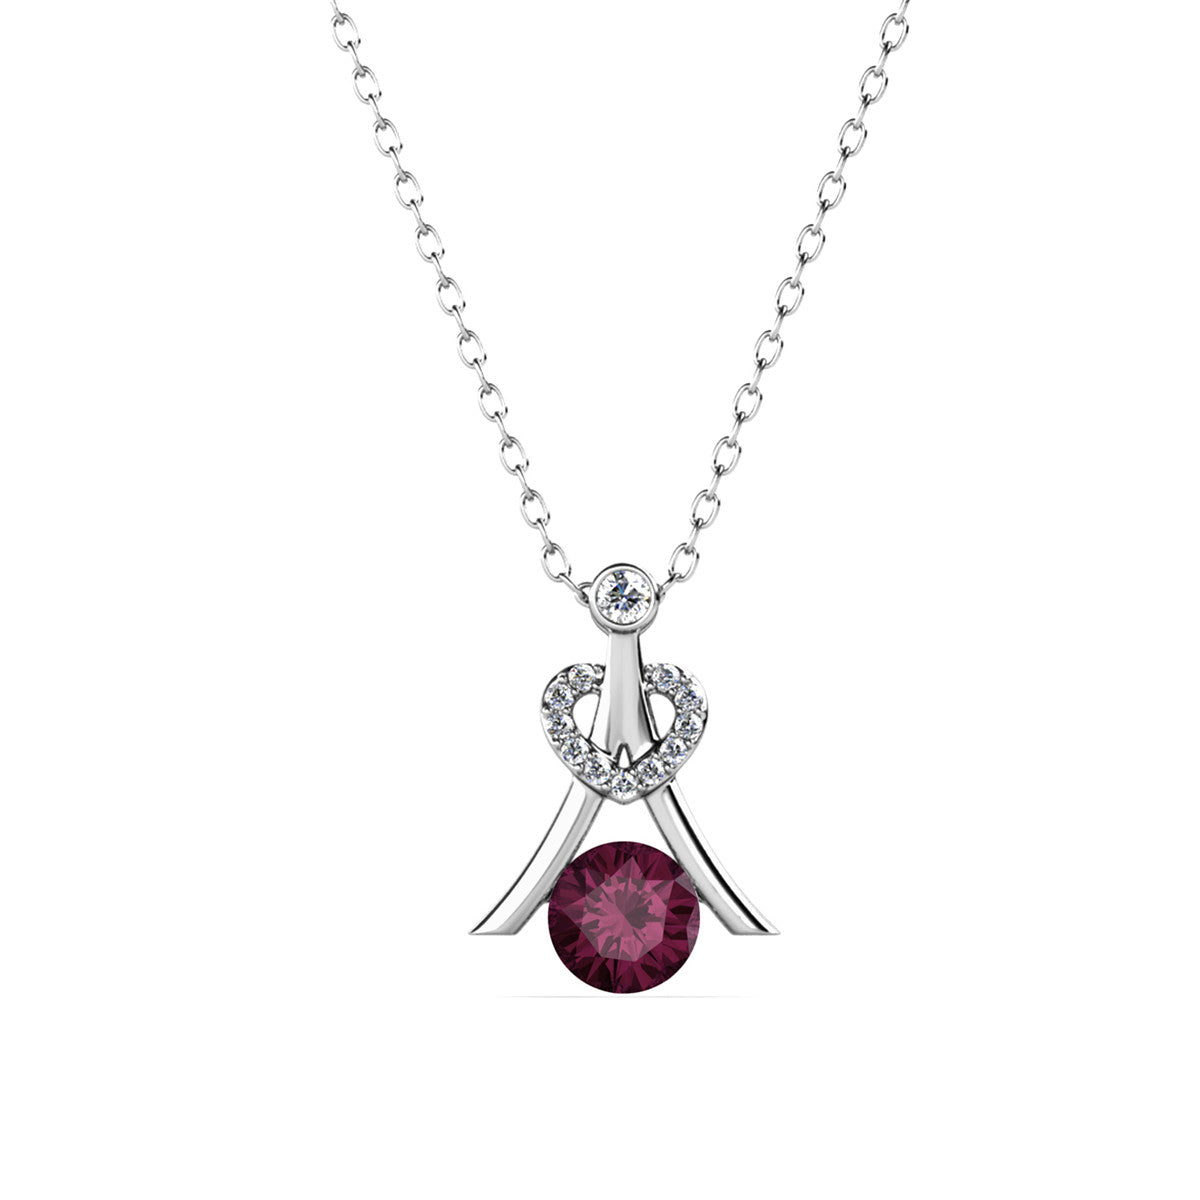 Serenity February Birthstone Amethyst Necklace, 18k White Gold Plated Silver Necklace with Round Cut Crystals